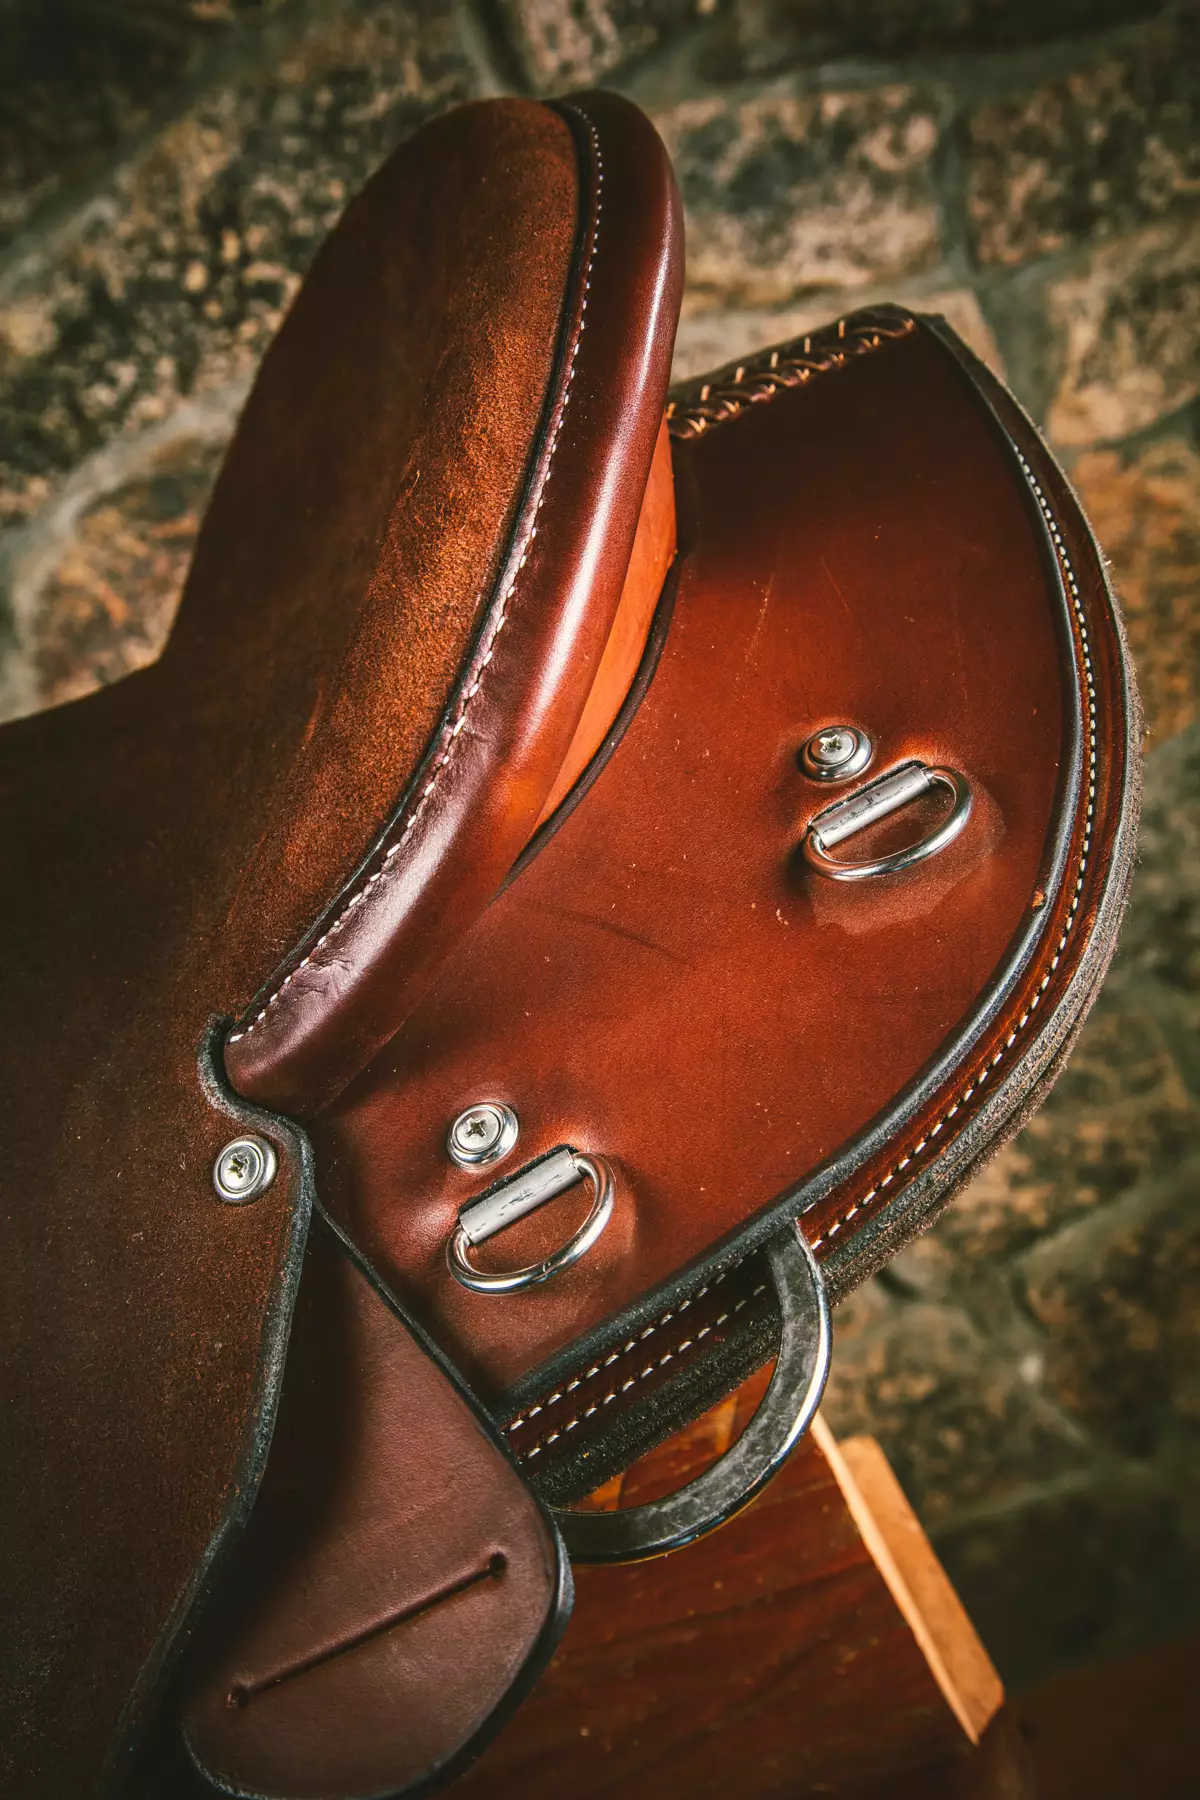 Saddle Features 9